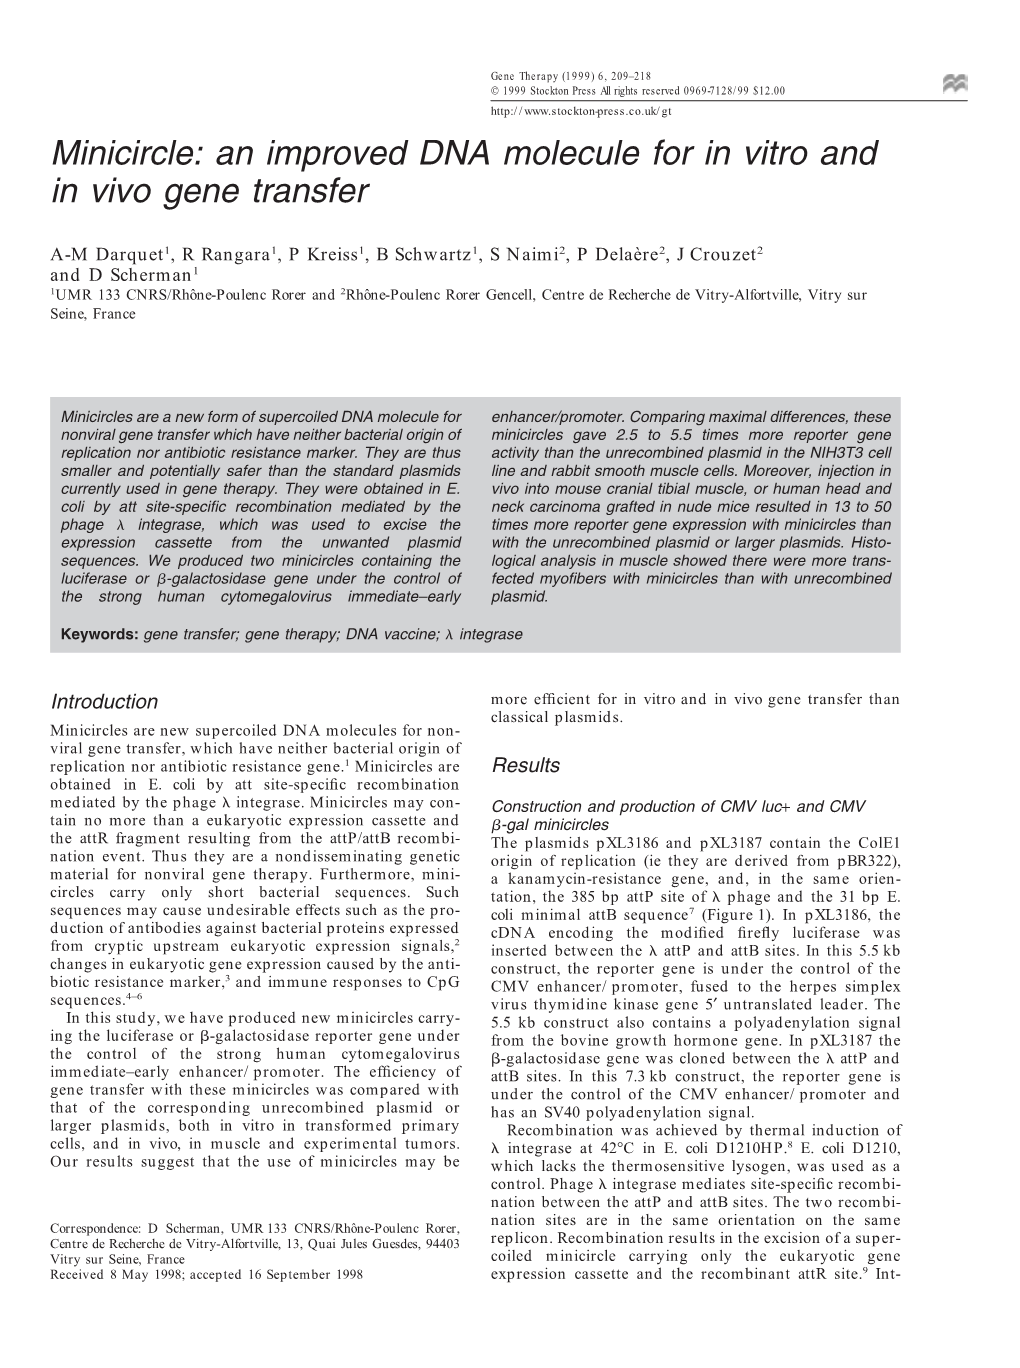 Minicircle: an Improved DNA Molecule for in Vitro and in Vivo Gene Transfer